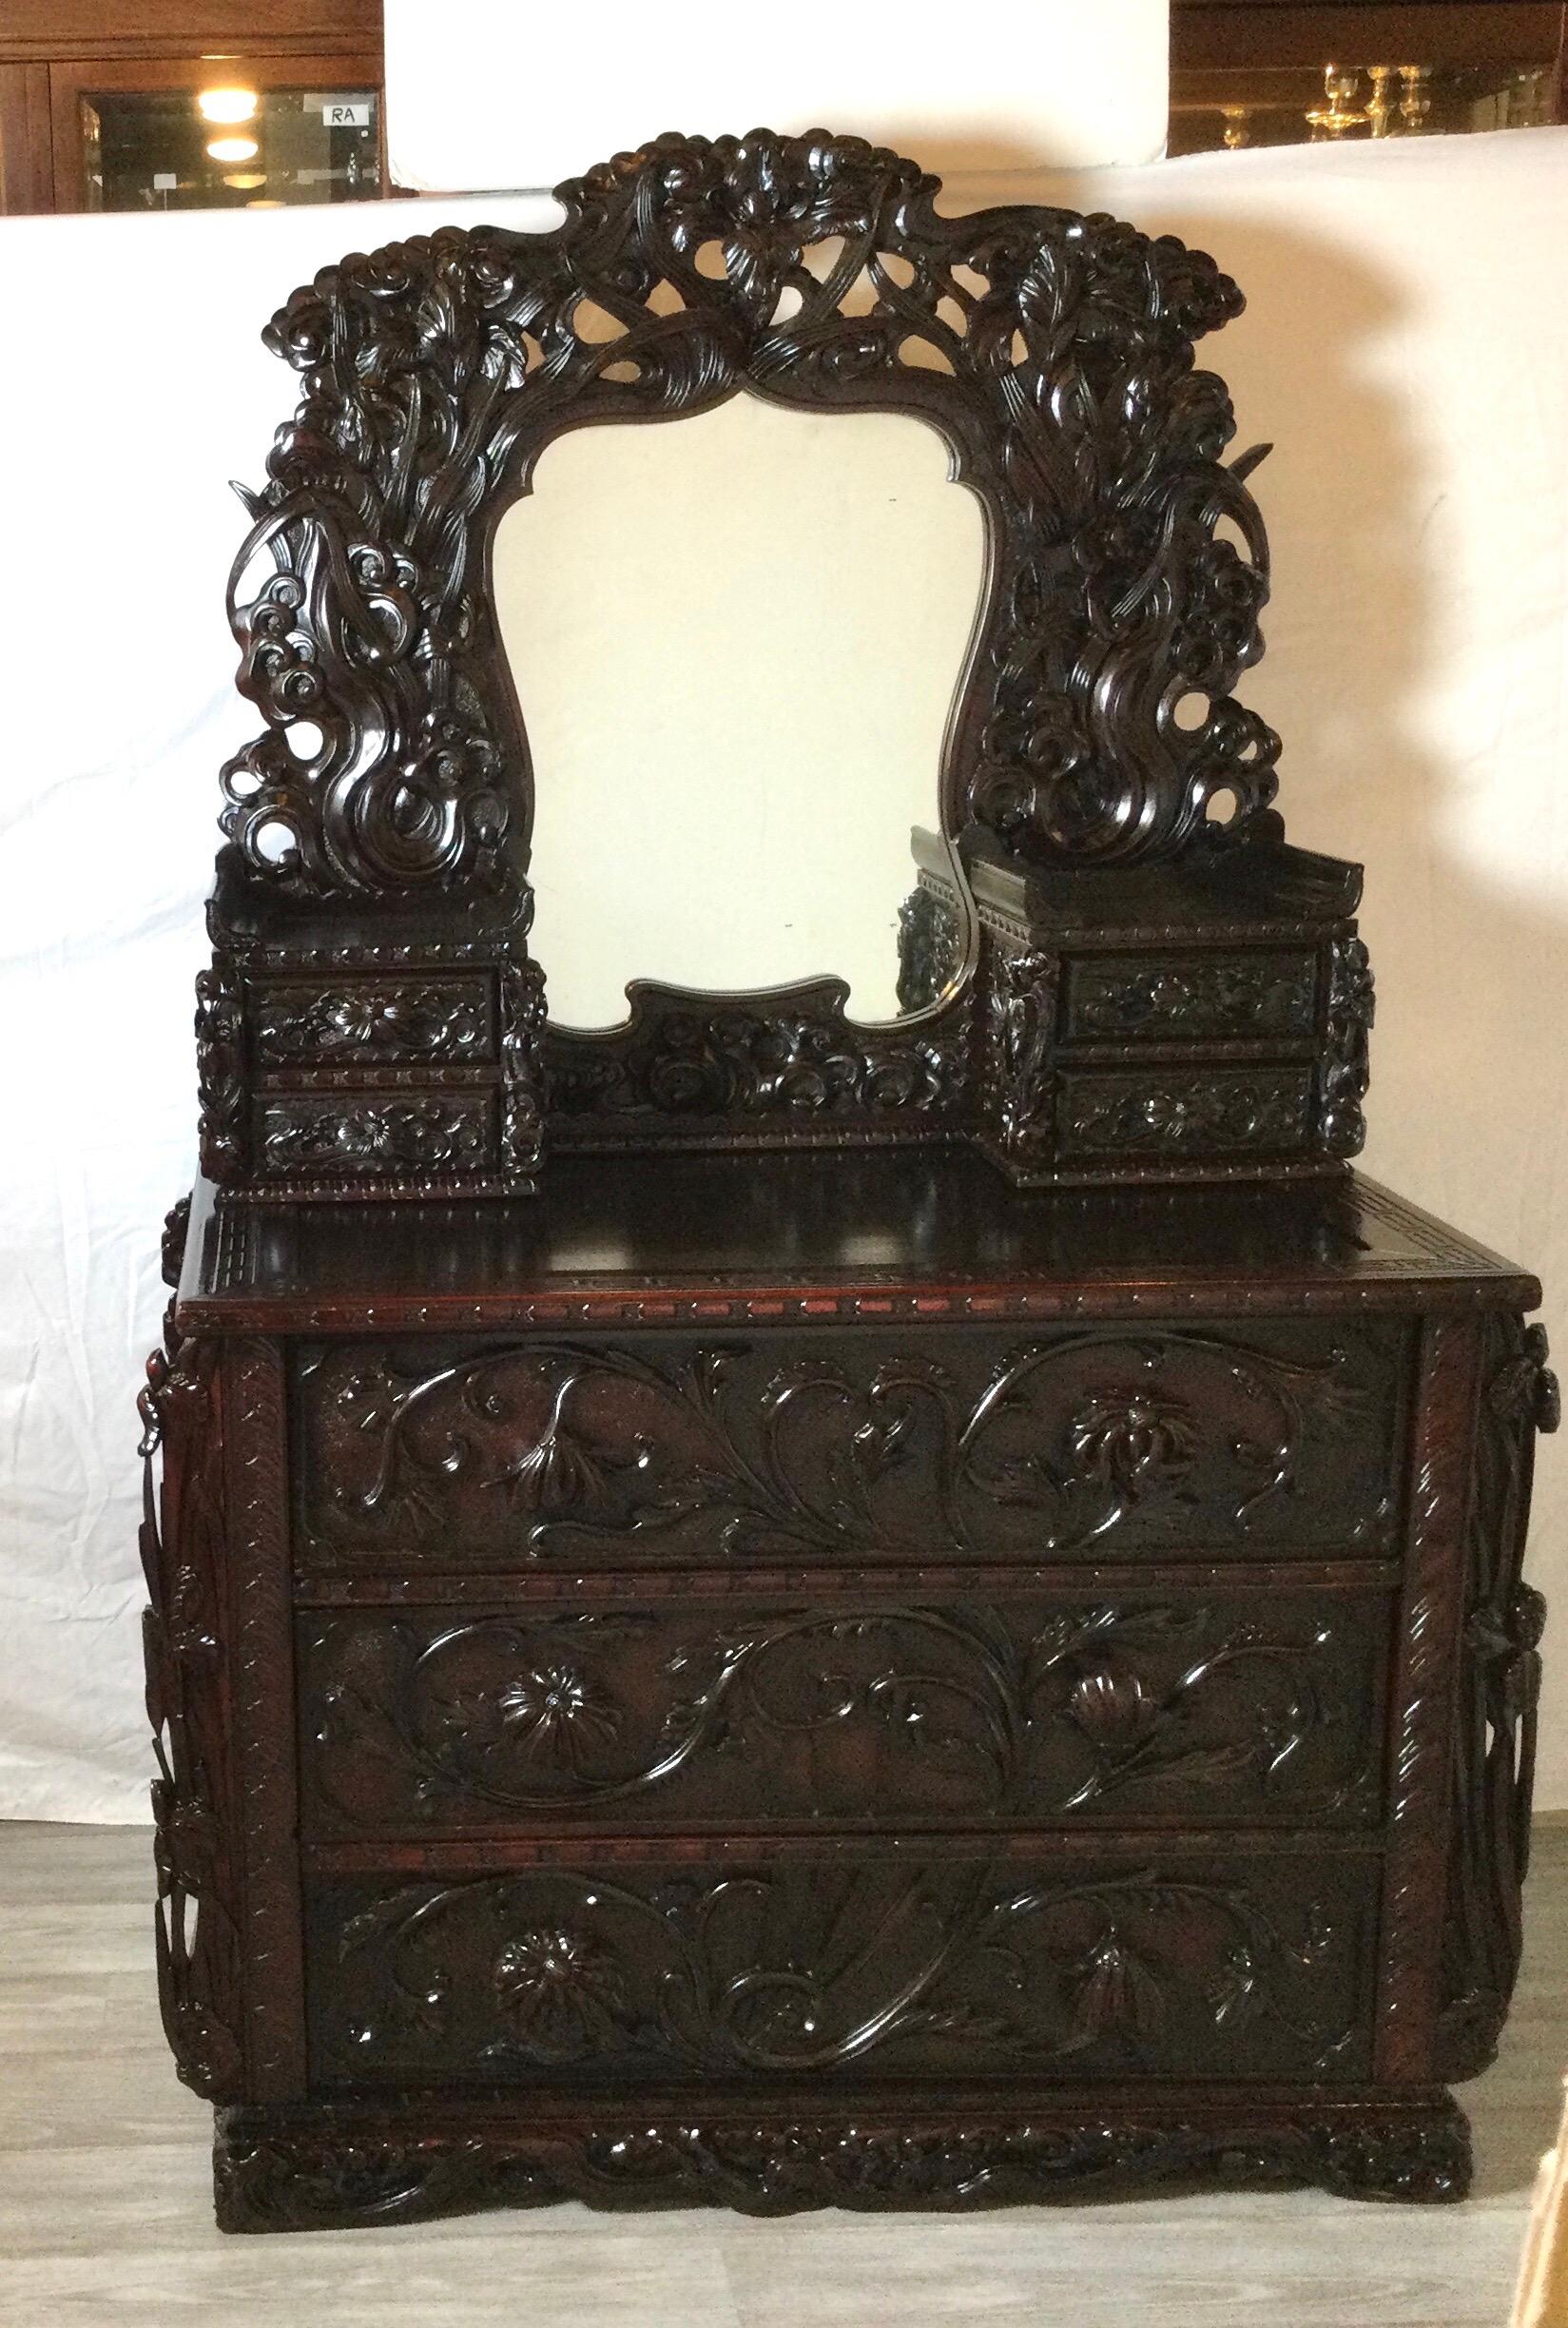 An elaborately carved Japanese chest of drawers with mirror. The chest with three large drawers with carved fronts with a mirror with intricately carved frame with two smaller drawers on each side, flanking the mirror. 

Measures: 46